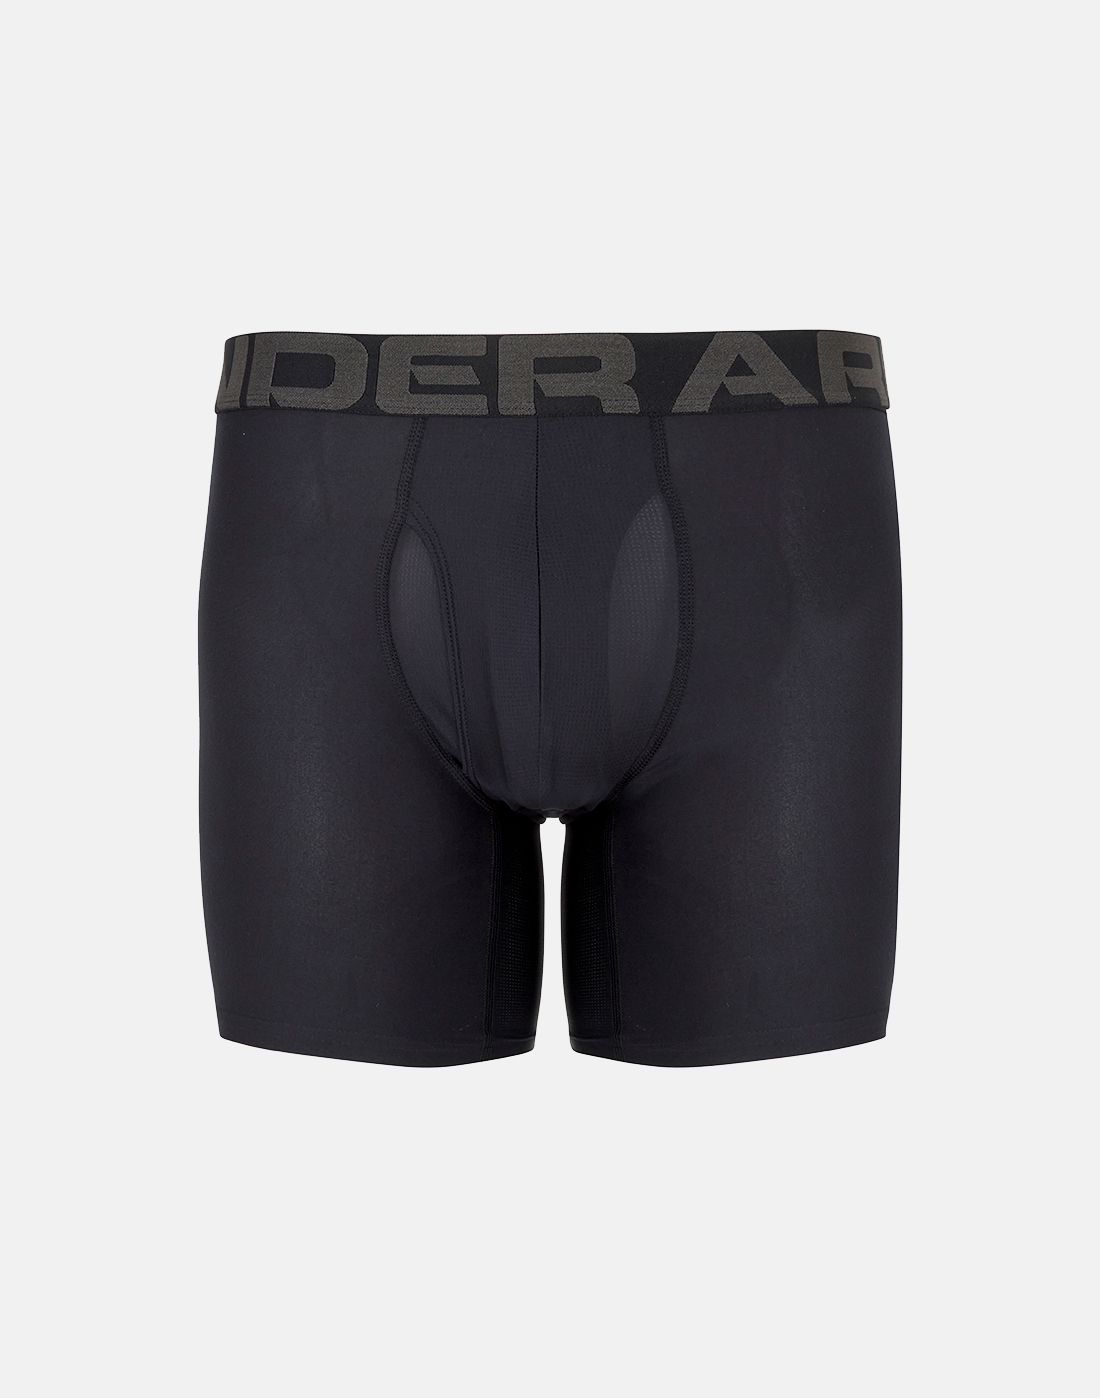 Under Armour Mens Tech 6 Inch 2 Pack Boxers - Black | Life Style Sports IE